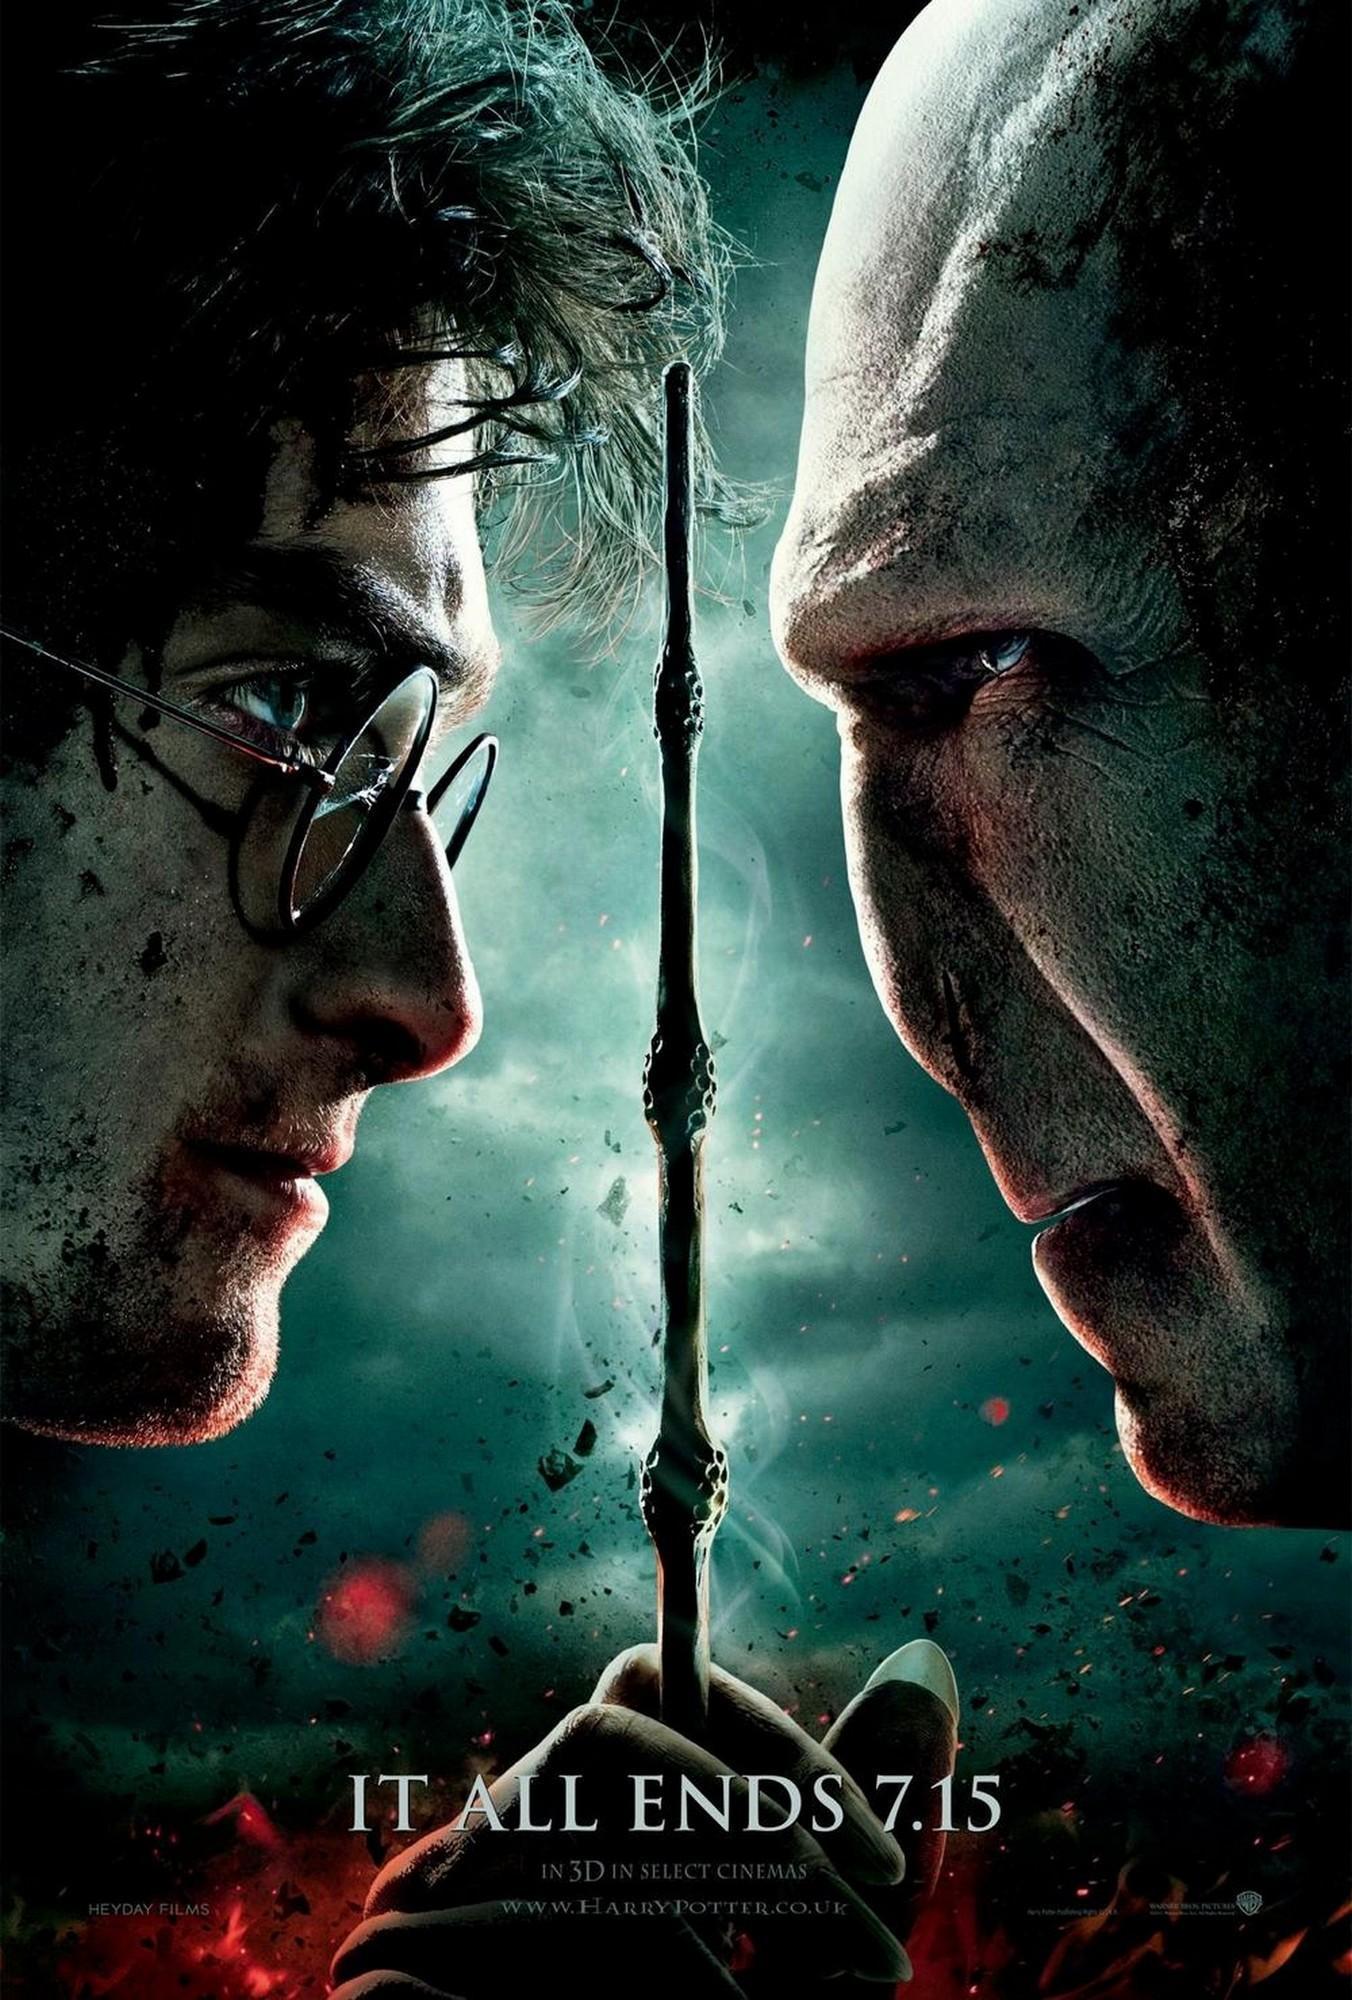 Harry Potter and the Deathly Hallows Part 2 (HQ) - Harry Potter Vs. Twilight Photo ...